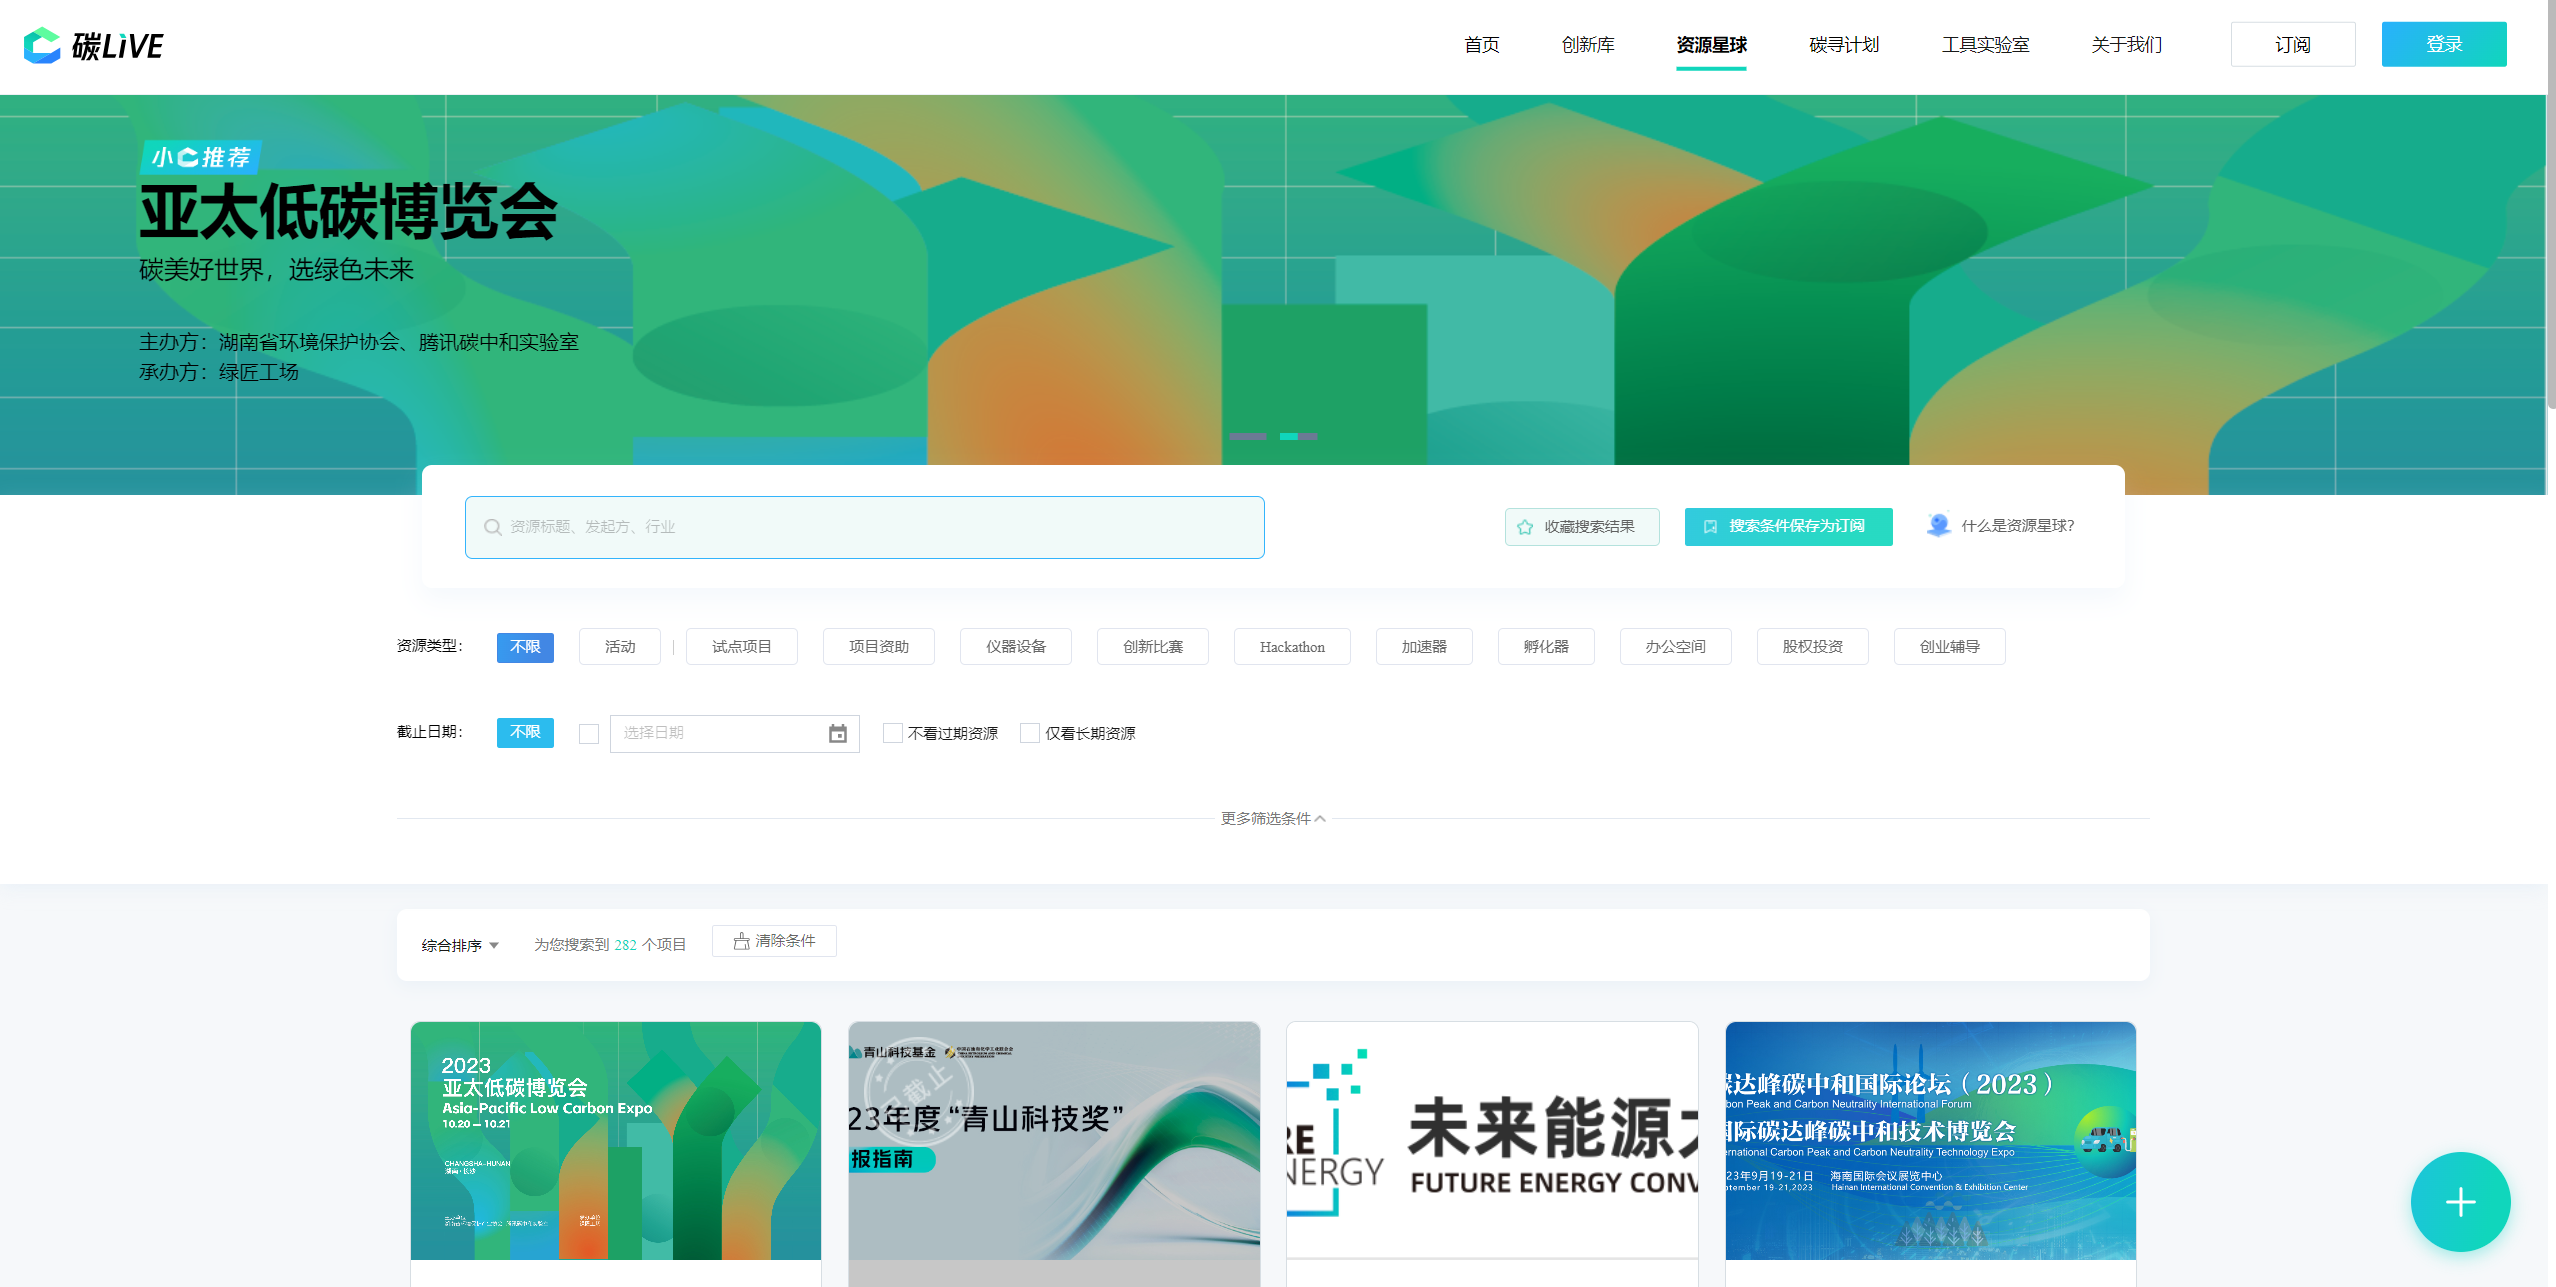 Asia-Pacific Low Carbon Expo 2023 Officially on Tencent’s TanLIVE Platform